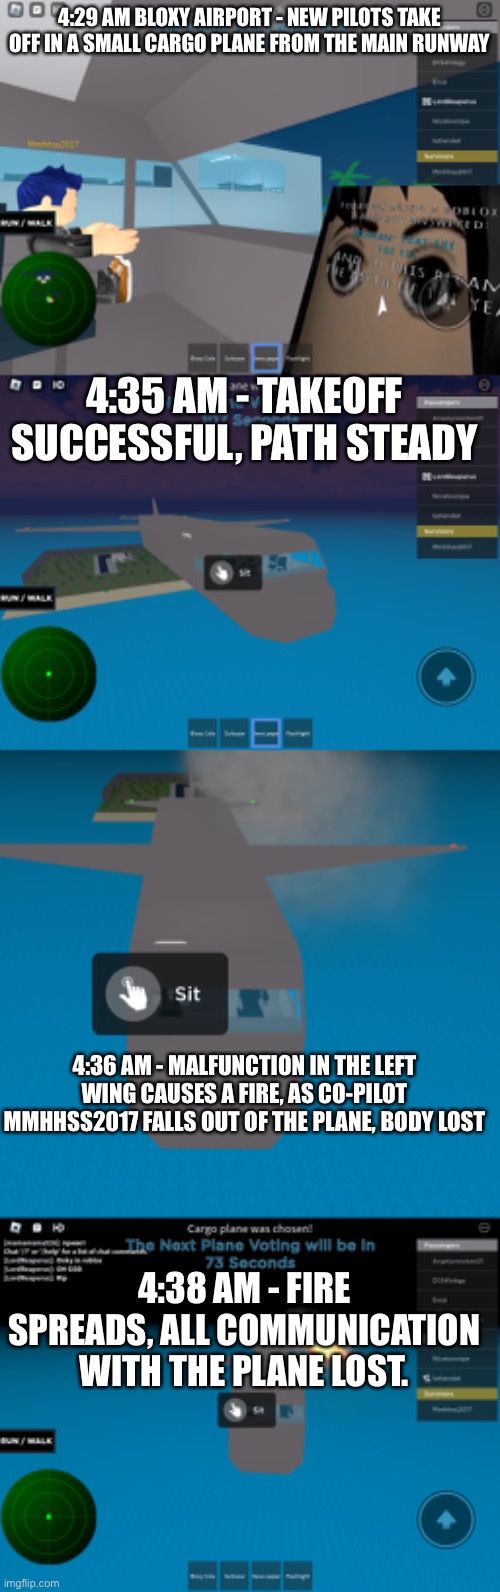 No known survivors. | 4:29 AM BLOXY AIRPORT - NEW PILOTS TAKE OFF IN A SMALL CARGO PLANE FROM THE MAIN RUNWAY; 4:35 AM - TAKEOFF SUCCESSFUL, PATH STEADY; 4:36 AM - MALFUNCTION IN THE LEFT WING CAUSES A FIRE, AS CO-PILOT MMHHSS2017 FALLS OUT OF THE PLANE, BODY LOST; 4:38 AM - FIRE SPREADS, ALL COMMUNICATION WITH THE PLANE LOST. | made w/ Imgflip meme maker